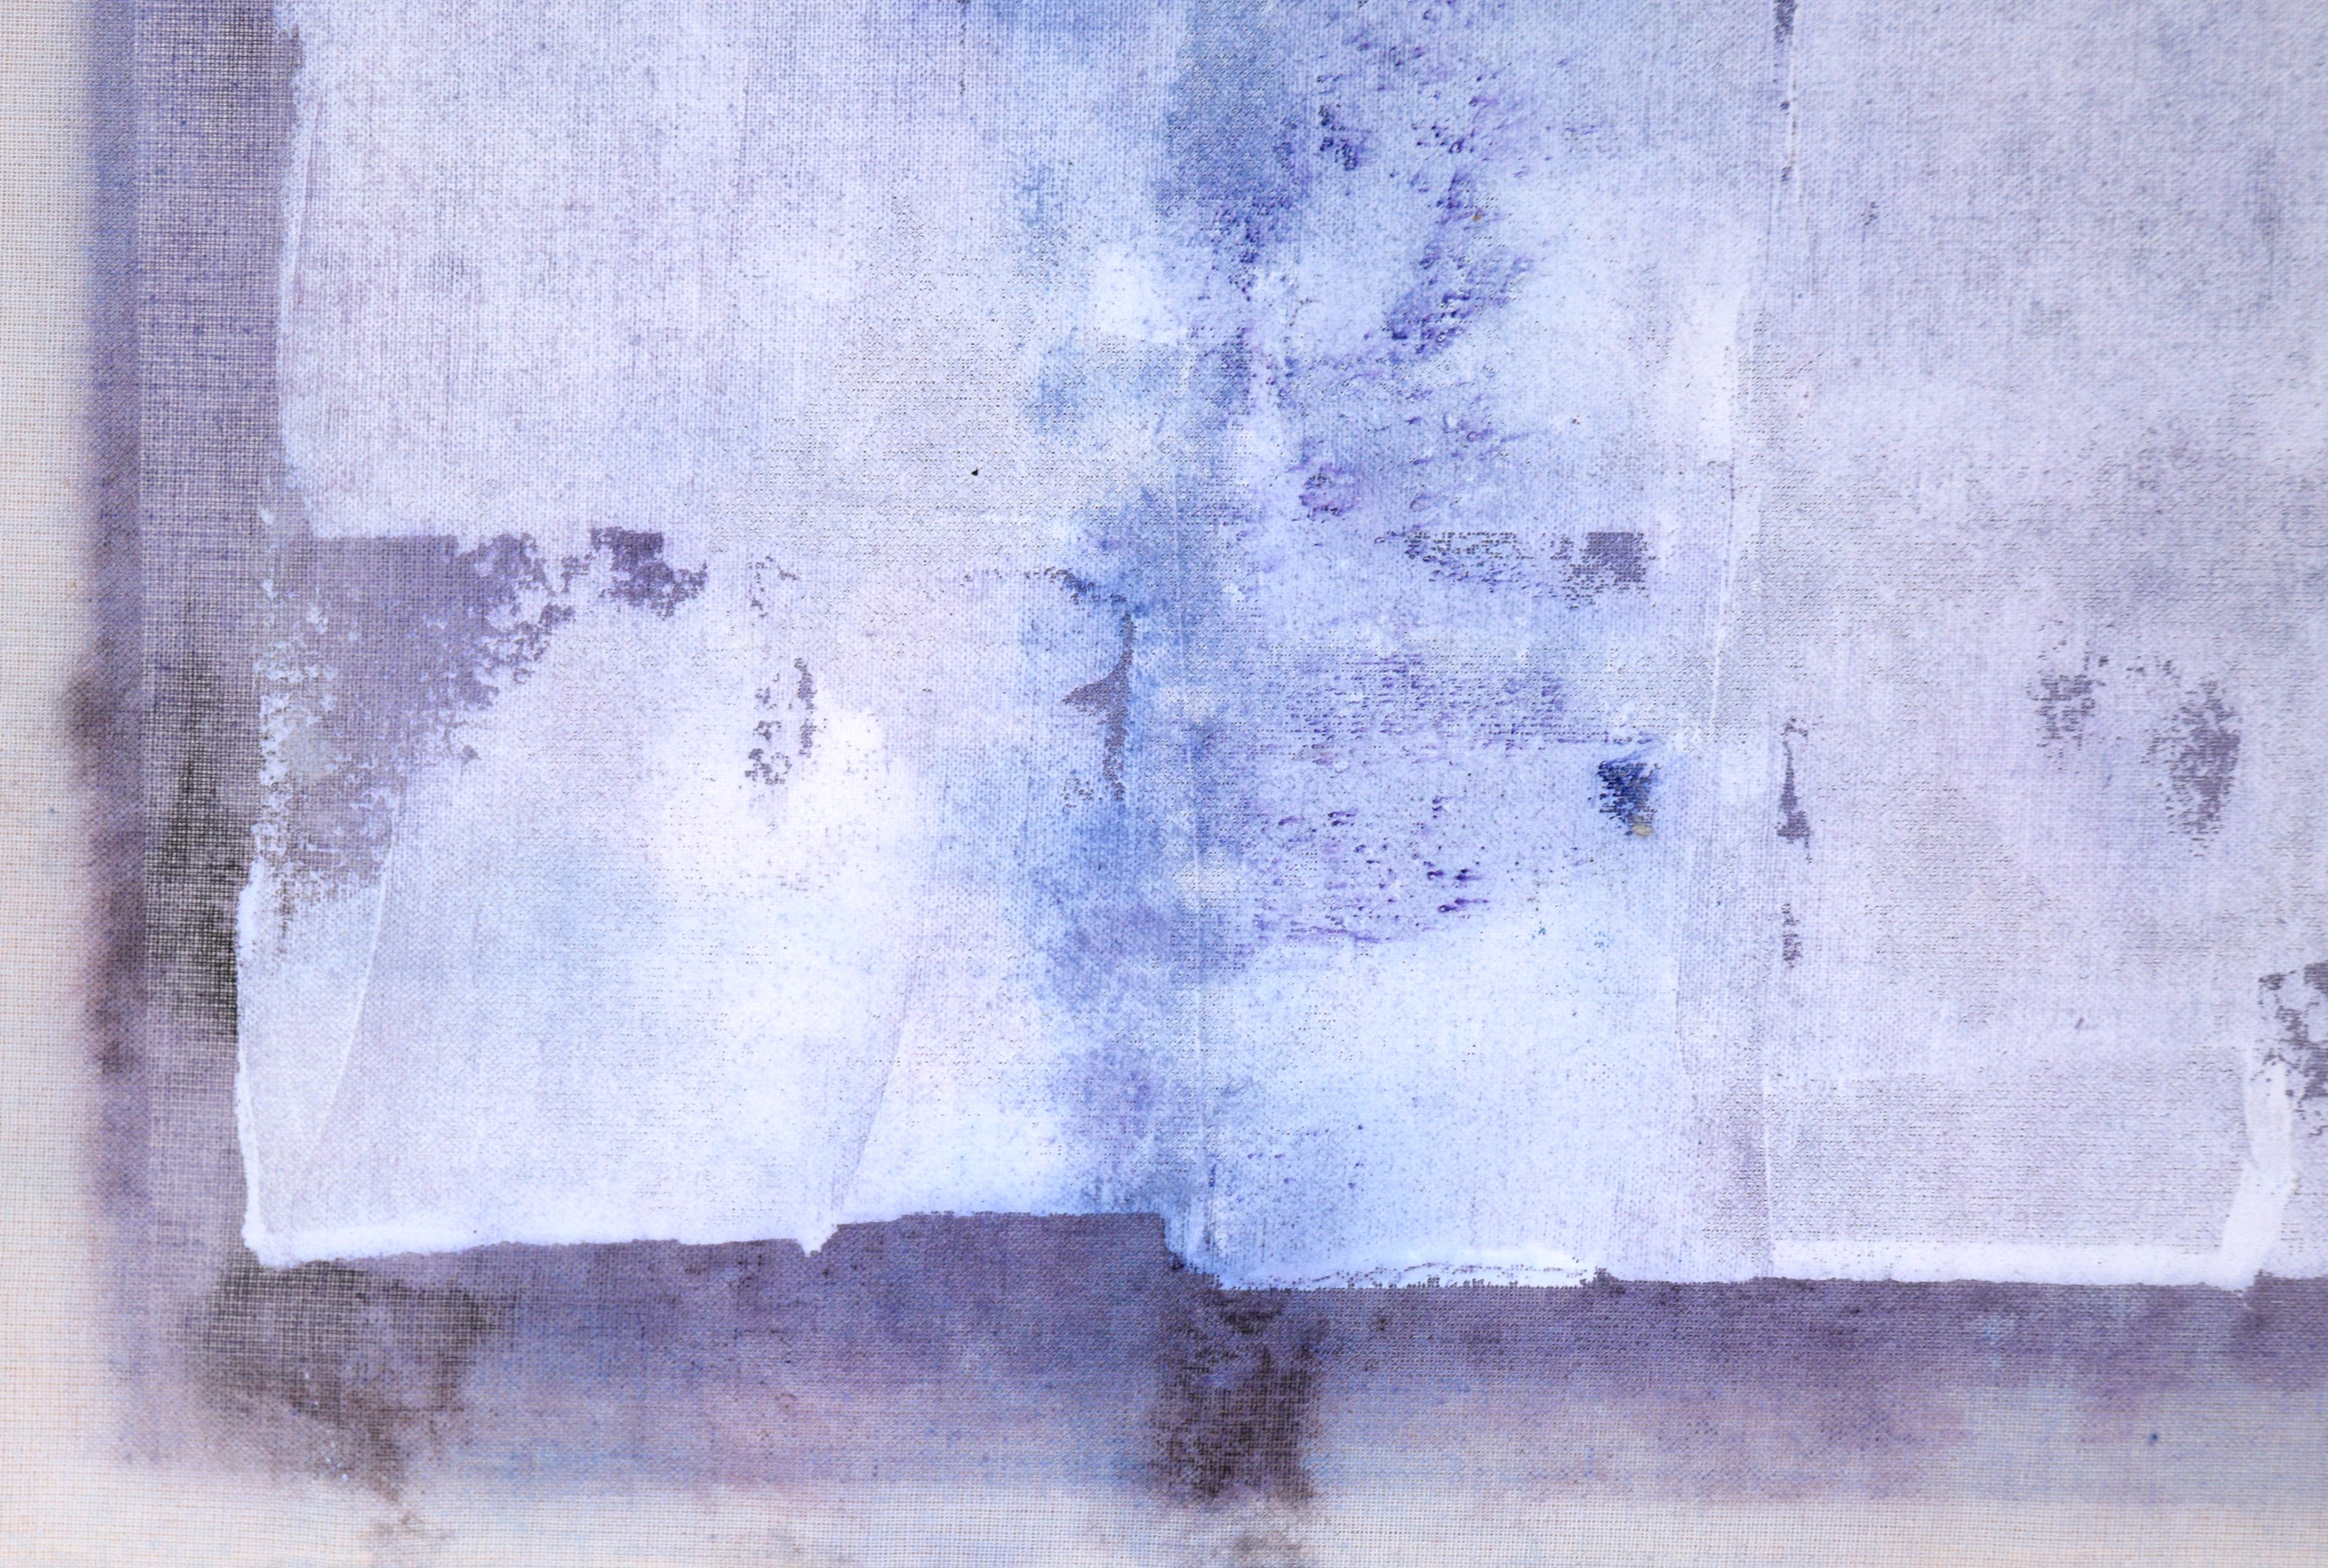 Patterned abstract by D. Whelan (American, 20th Century). A dark background of purple and blue has been unevenly applied to the linen, creating a hazy texture. Over the top of the dark background, there are patches of white that are partially